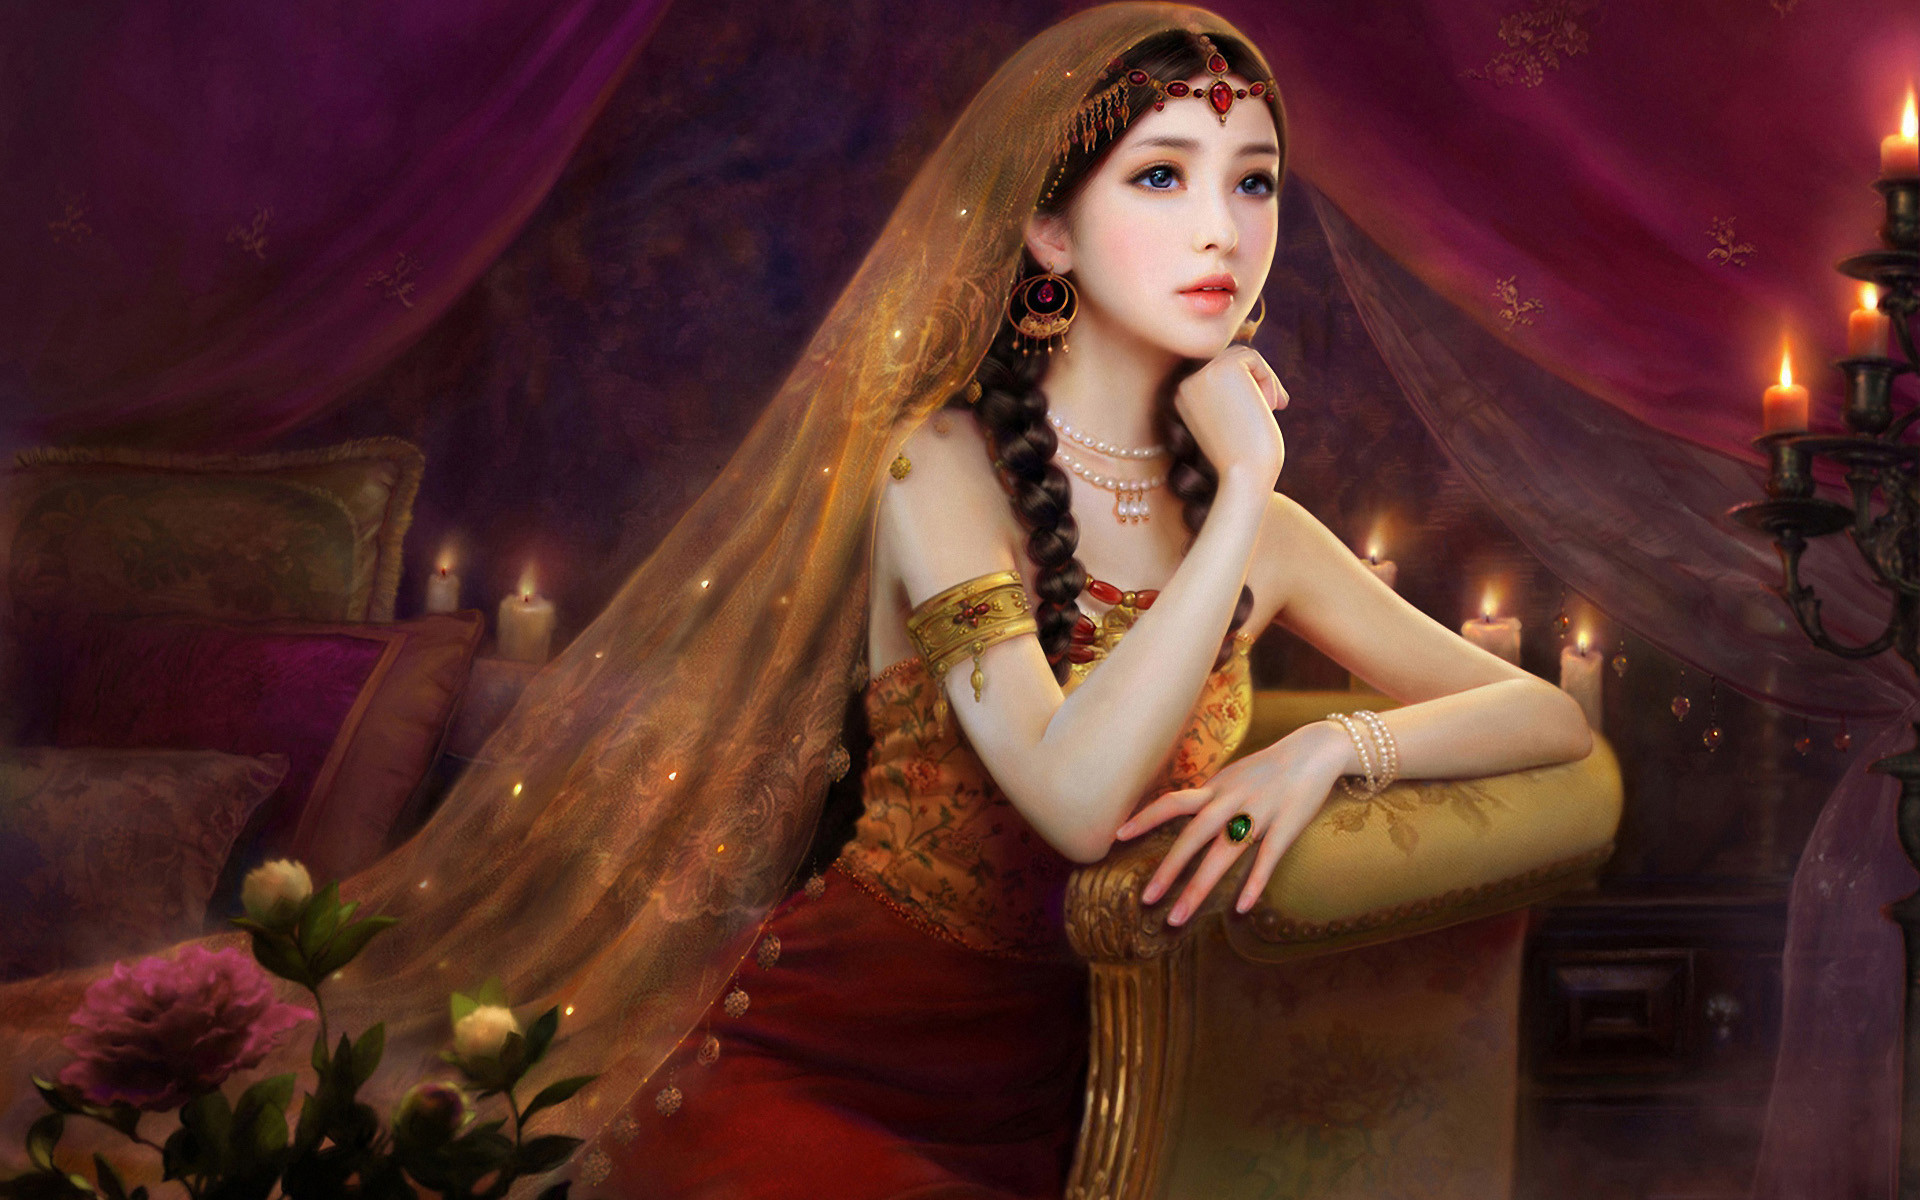 Queen Wallpaper Hd New Waiting For Someone 
 Data Src - Most Beautiful Girl Paintings - HD Wallpaper 